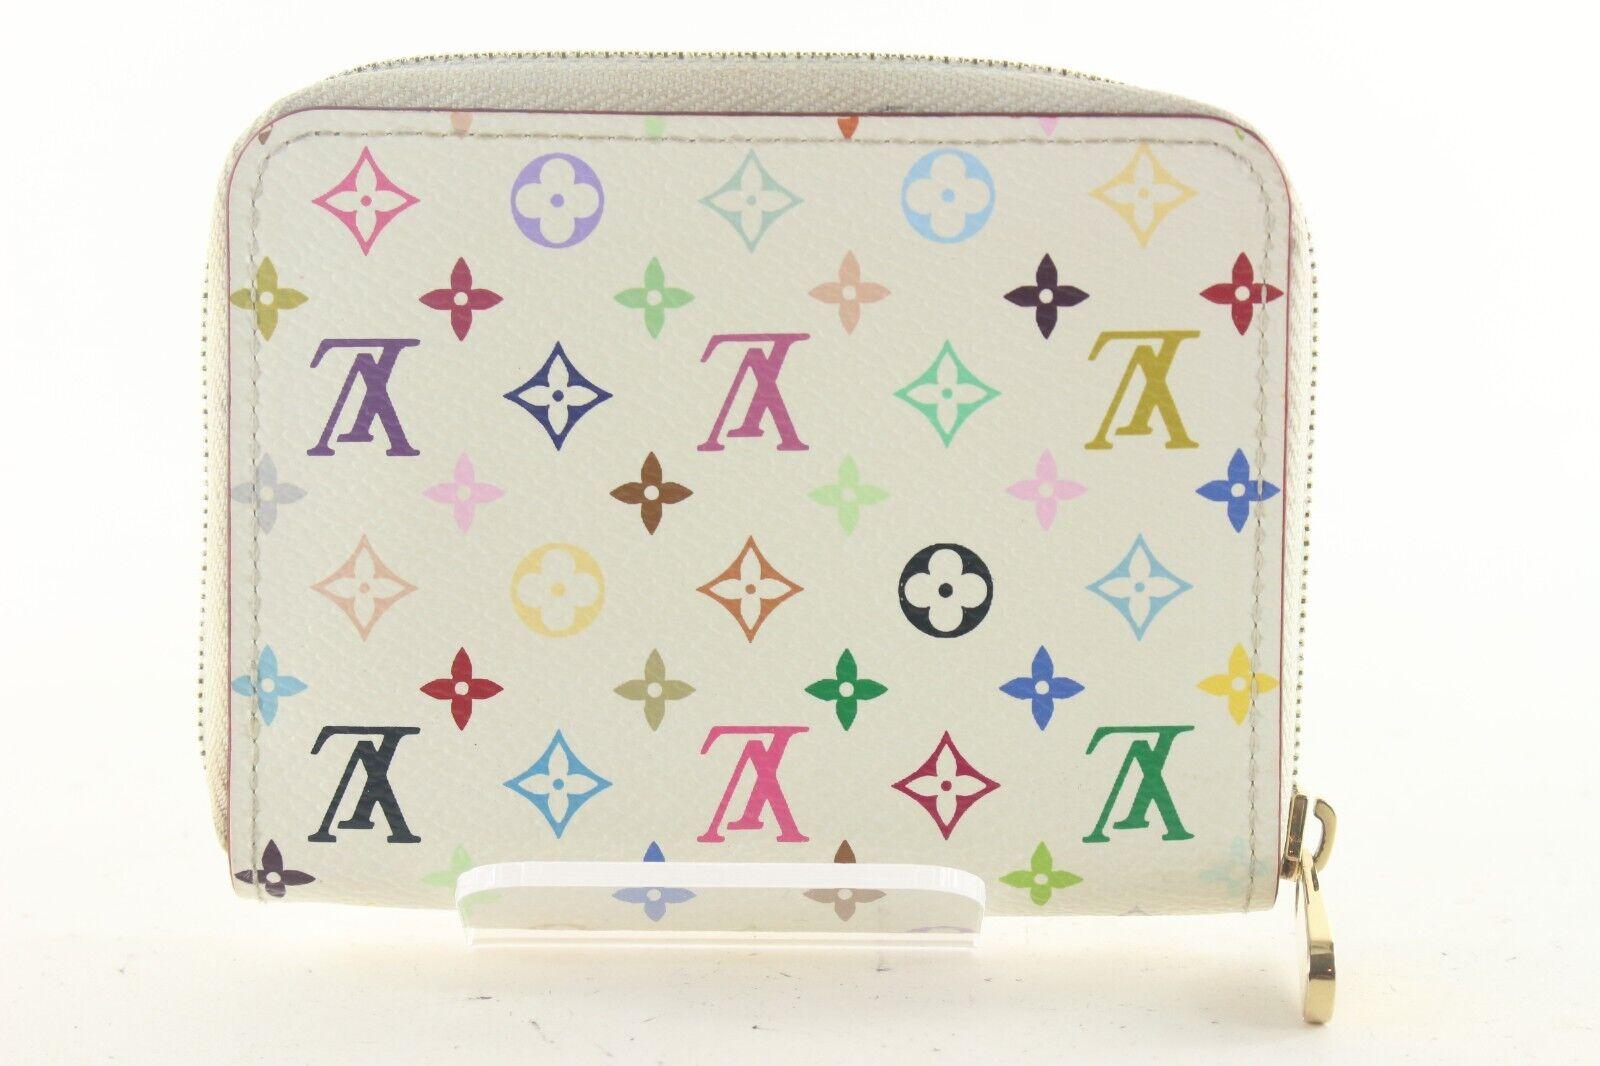 Louis Vuitton Monogram Mulitcolor Zippy Coin Wallet White 2LV82K In Good Condition For Sale In Dix hills, NY